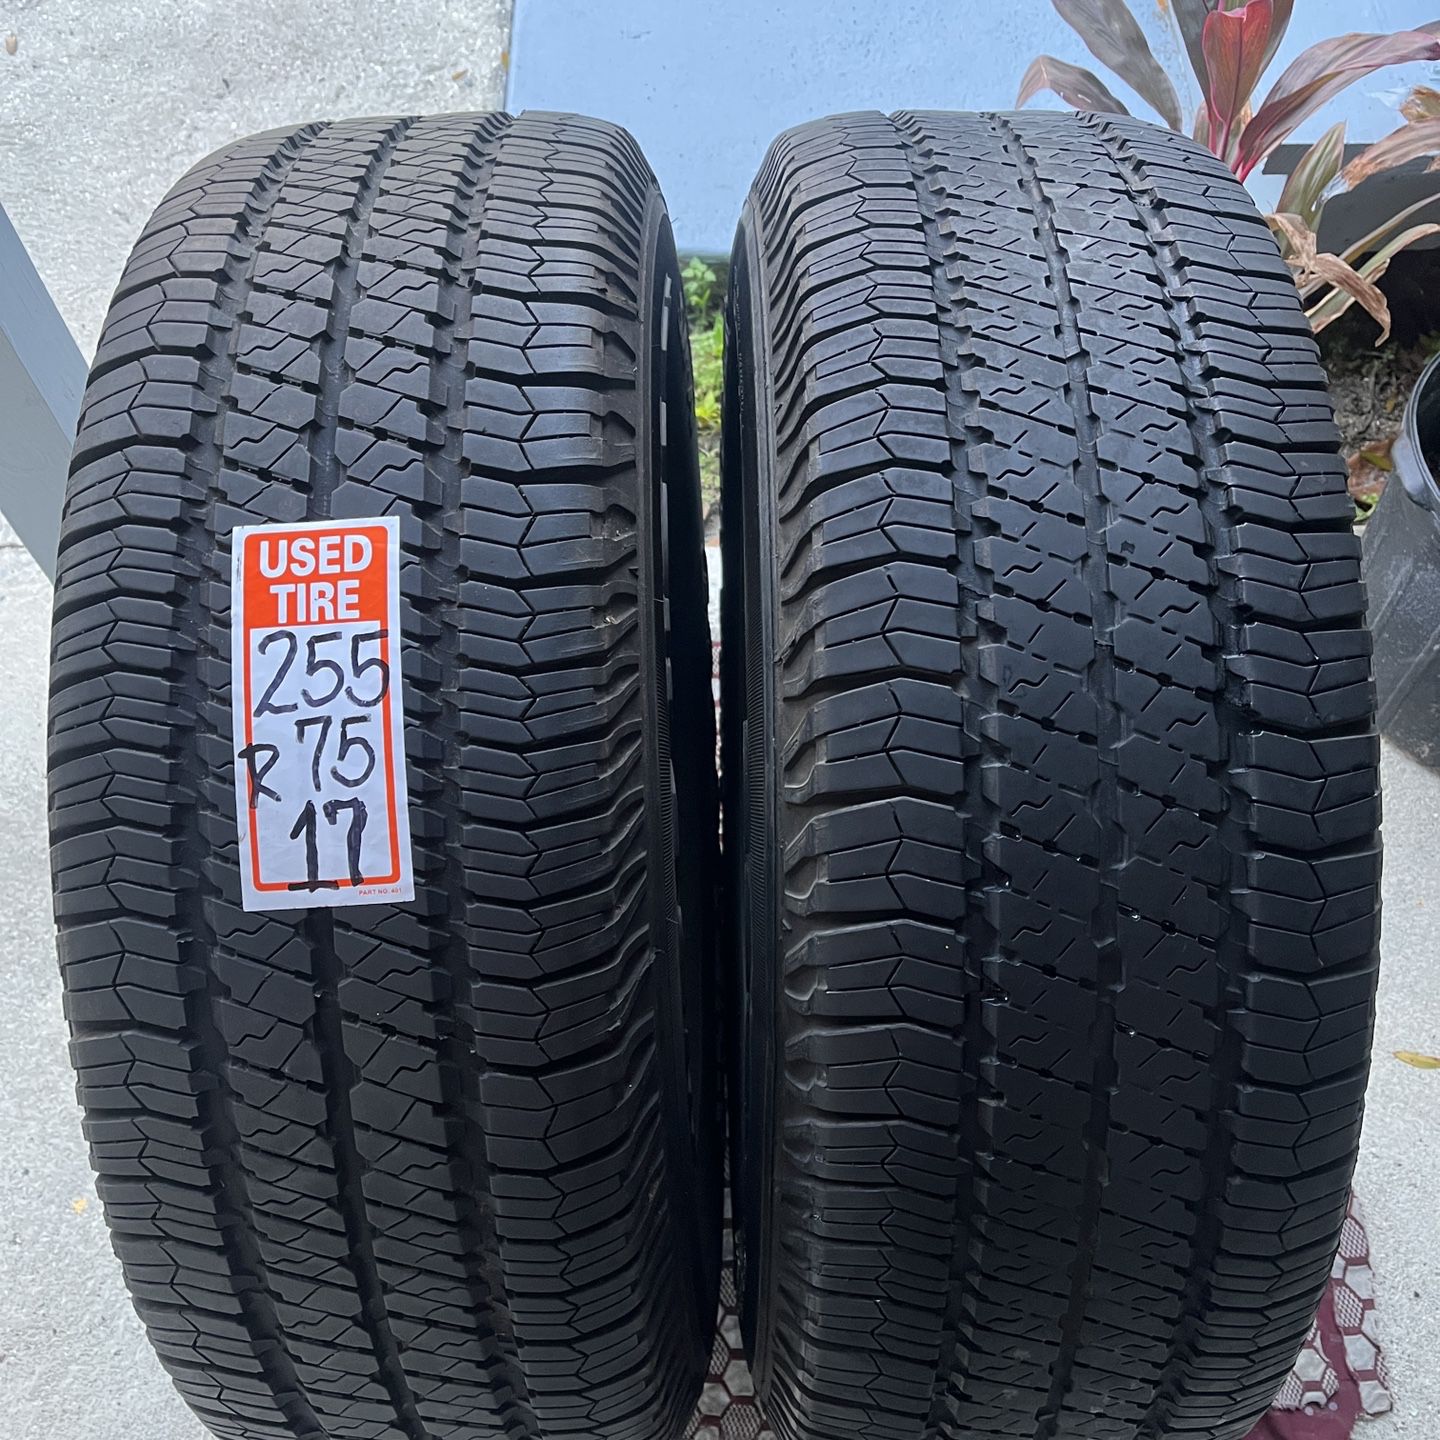 255/75R17 Pair 2tires Goodyear Wrangler SR-A 2019 80%life Zero Repairs for  Sale in Riverview, FL - OfferUp